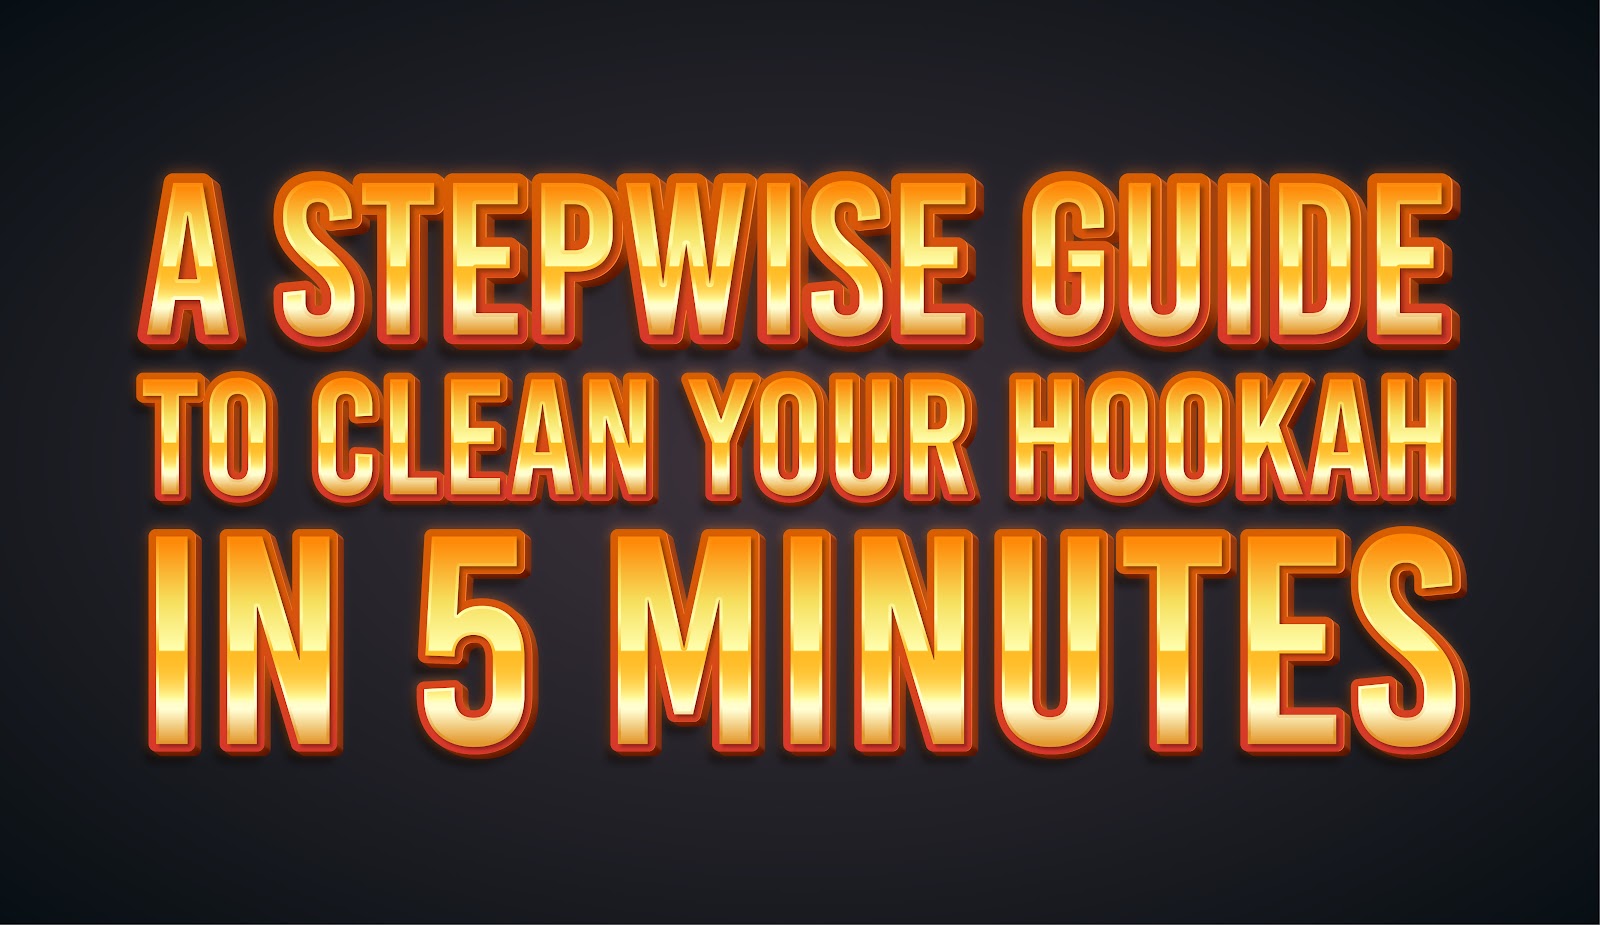 A Stepwise Guide To Clean Your Hookah in 5 Minutes